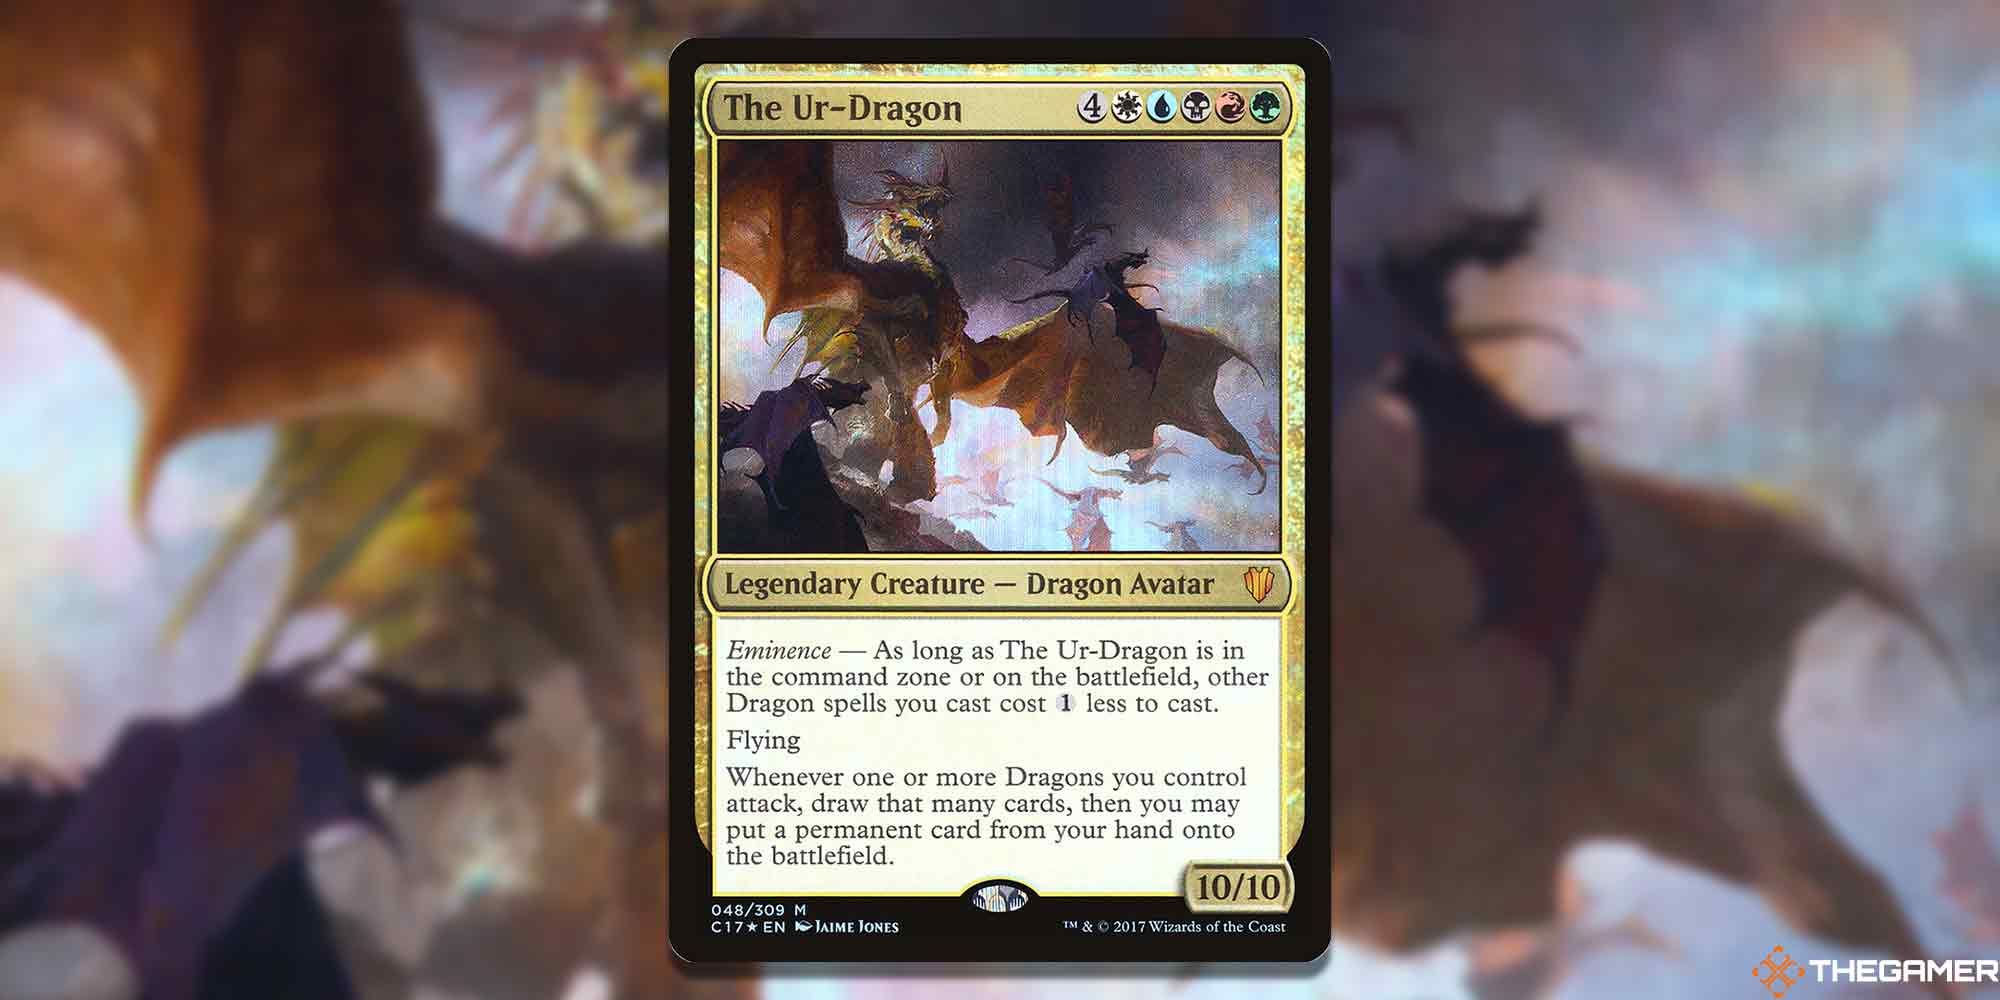 Image of the The Ur-Dragon card in Magic: The Gathering, with art by Jaime Jones